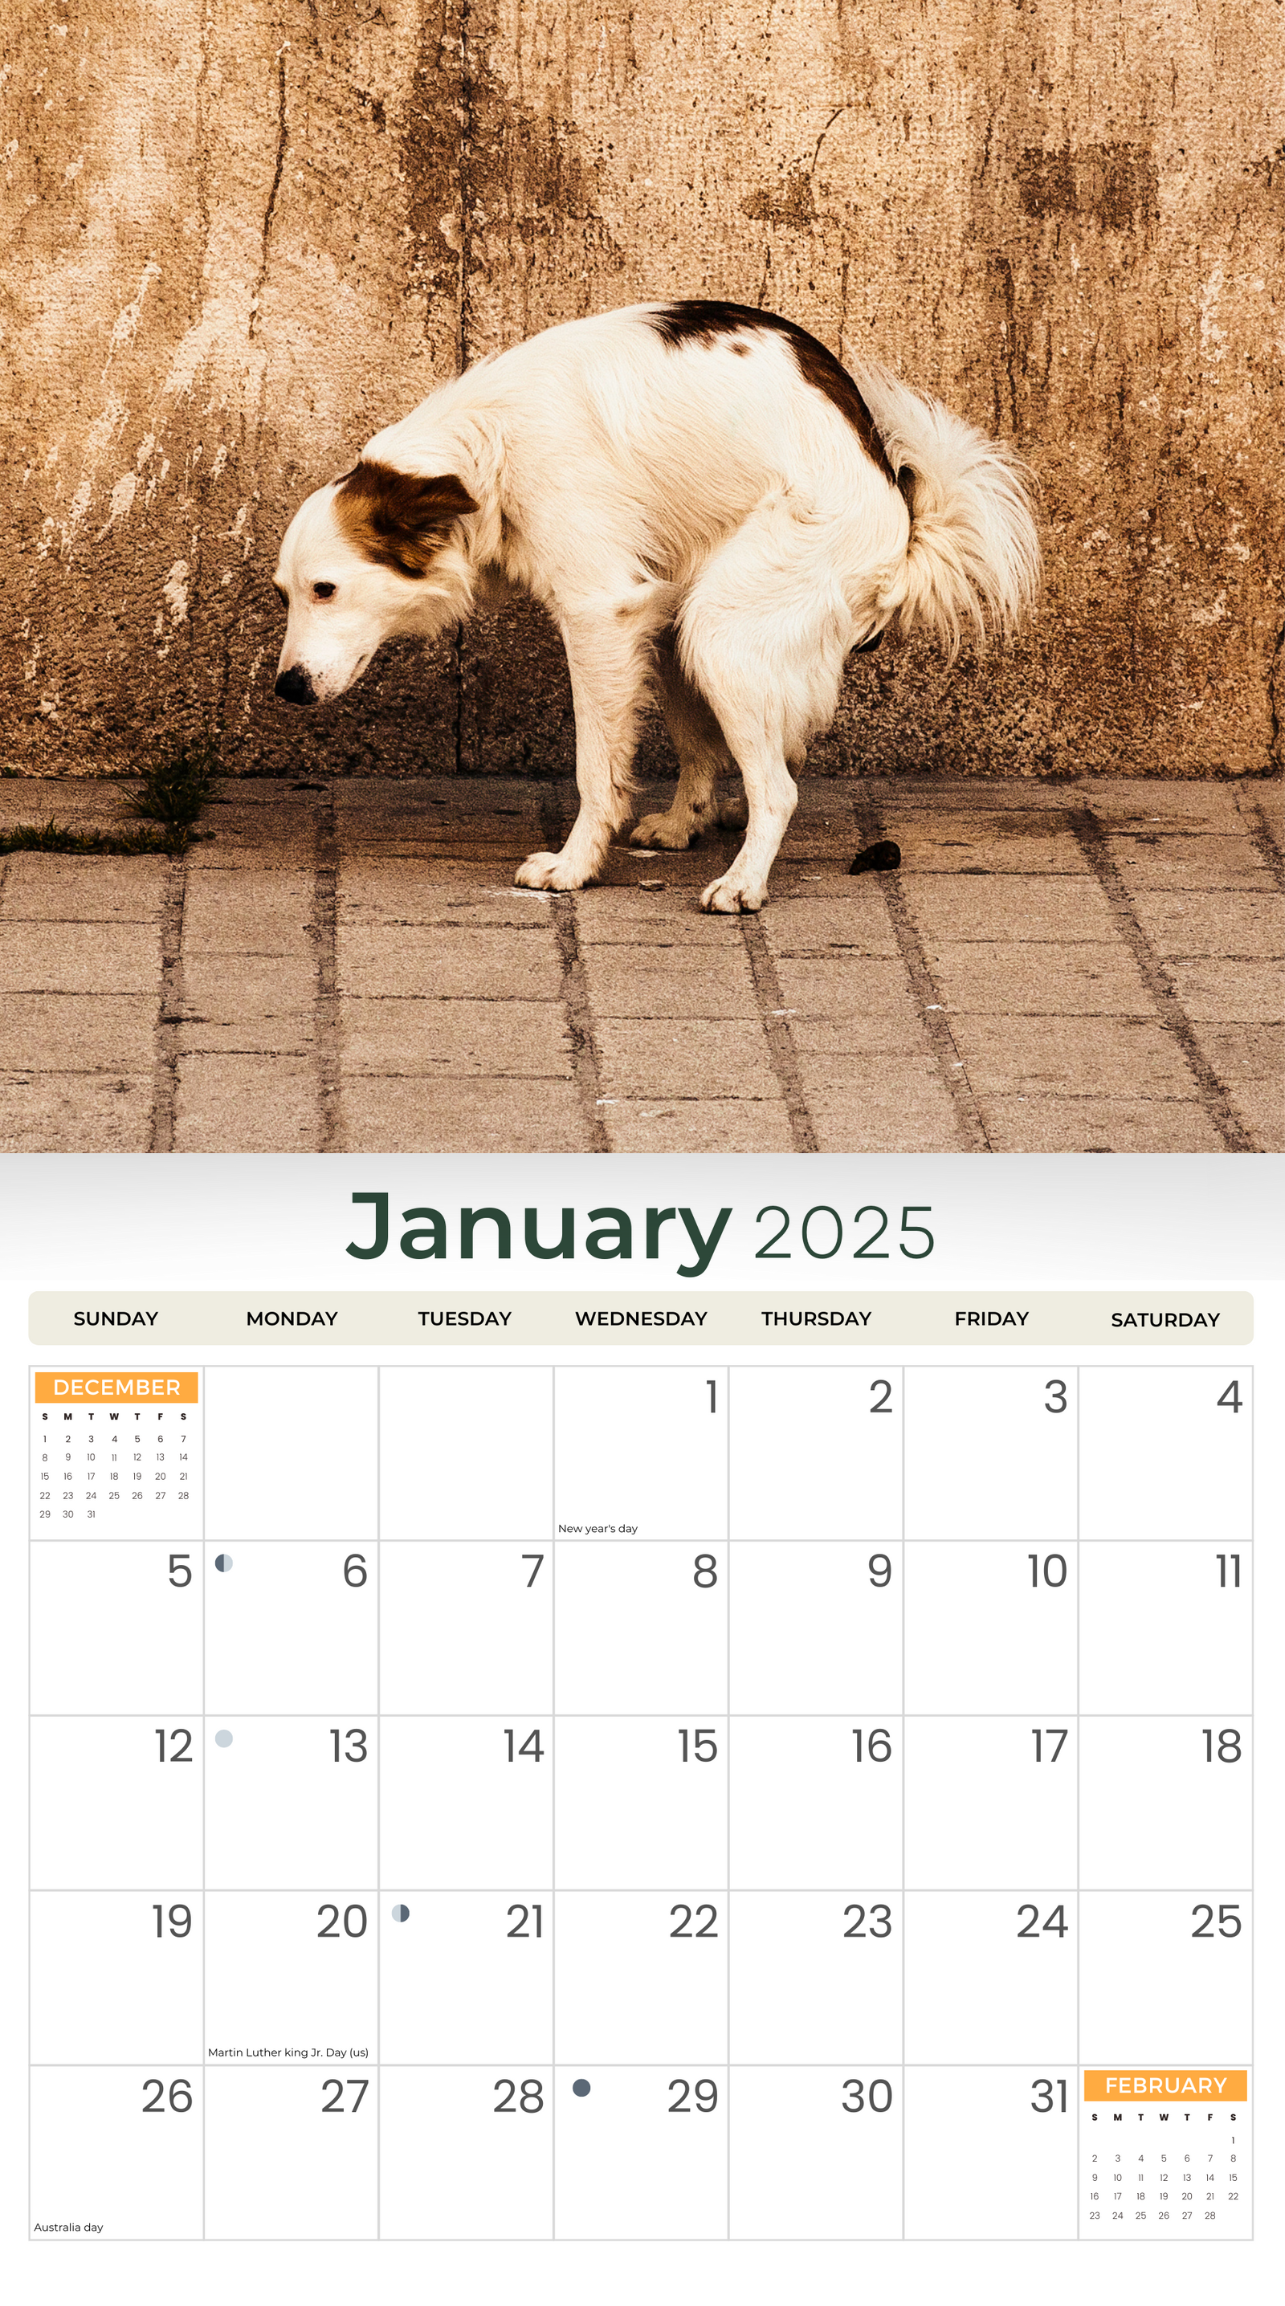 2025 Oh Crap (Pooping Dogs) - Deluxe Wall Calendar